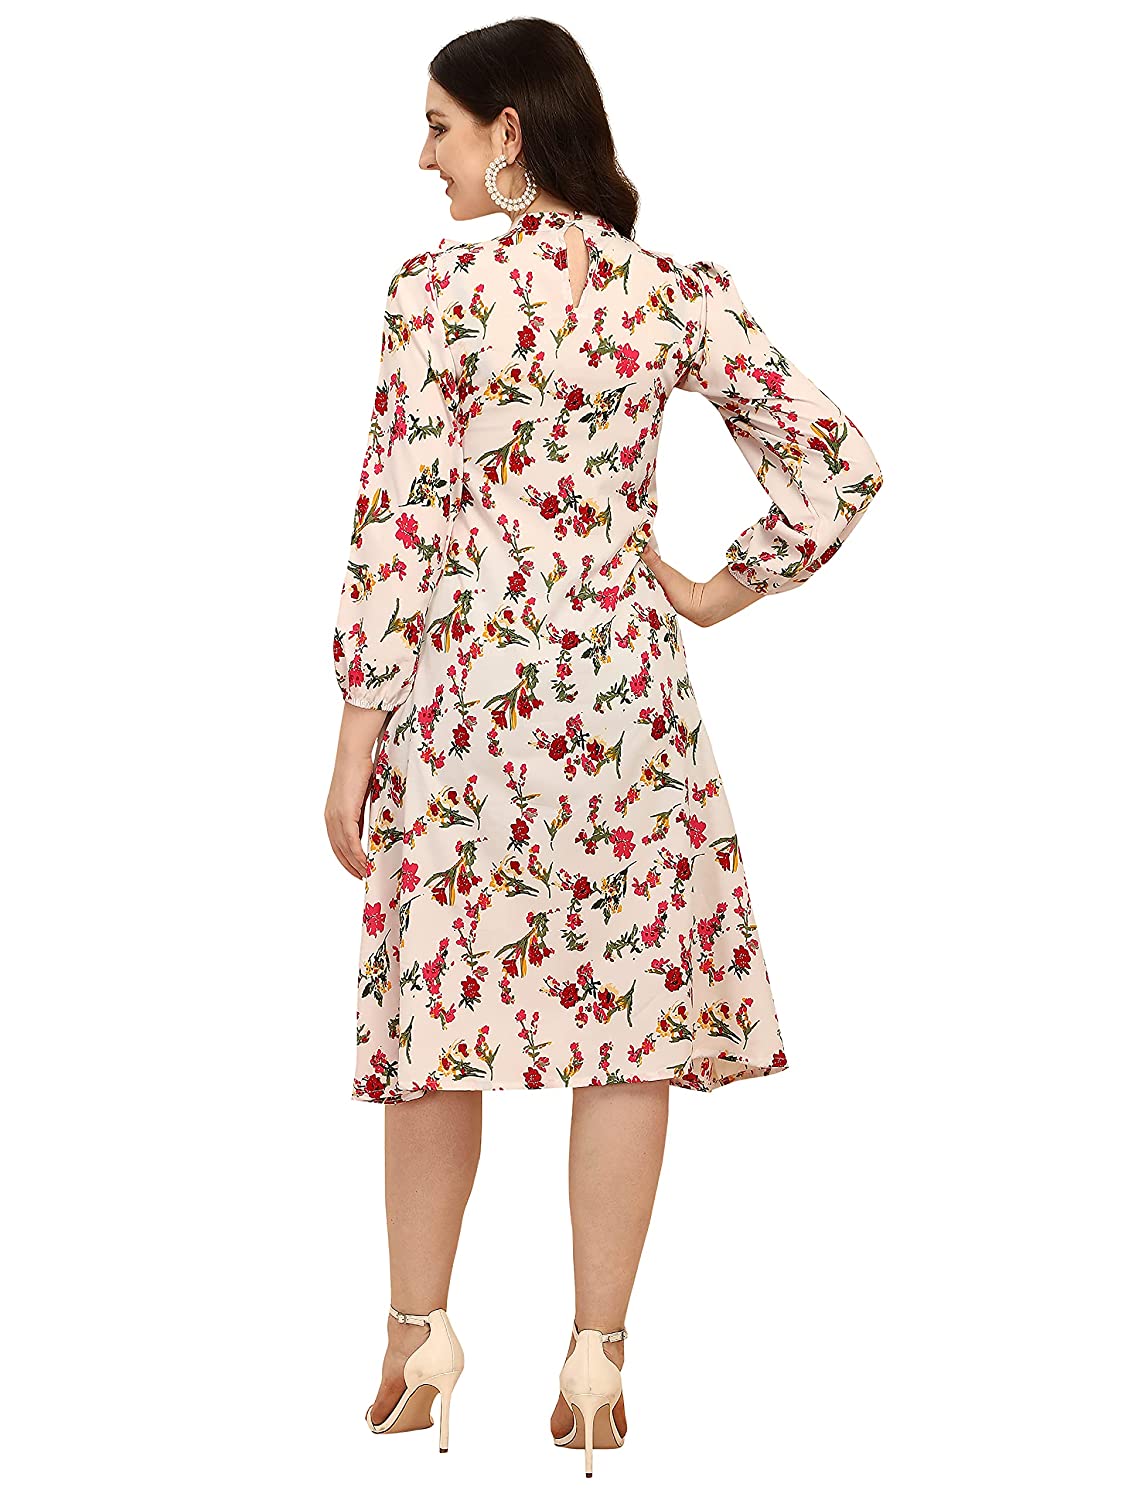 OOMPH! Women Dress -  DRESSES in Sri Lanka from Arcade Online Shopping - Just Rs. 4699!